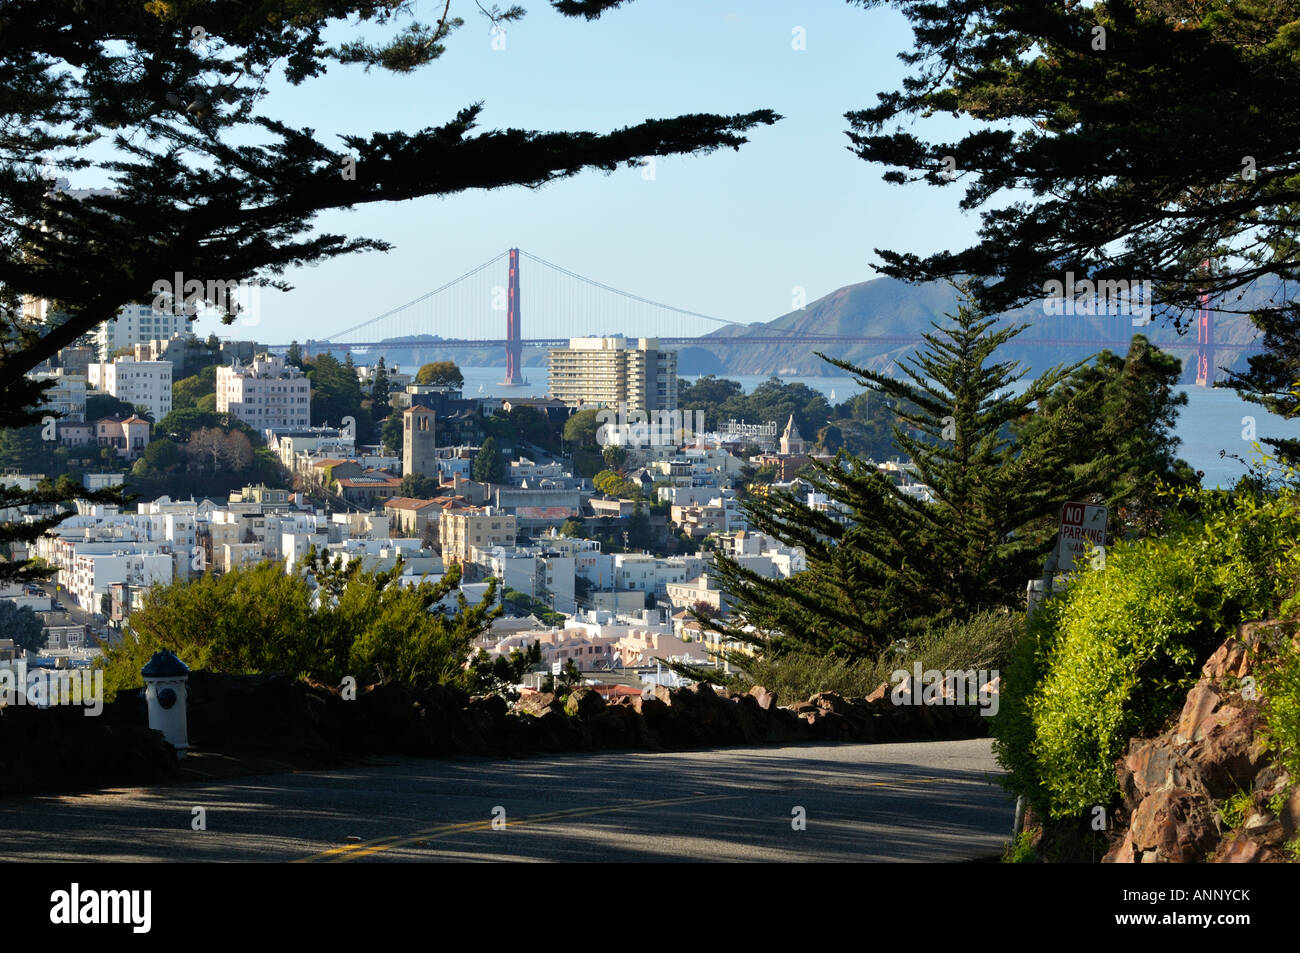 The Golden Gate bridge and strait seen from Telegraph Hill, San Francisco CA Stock Photo